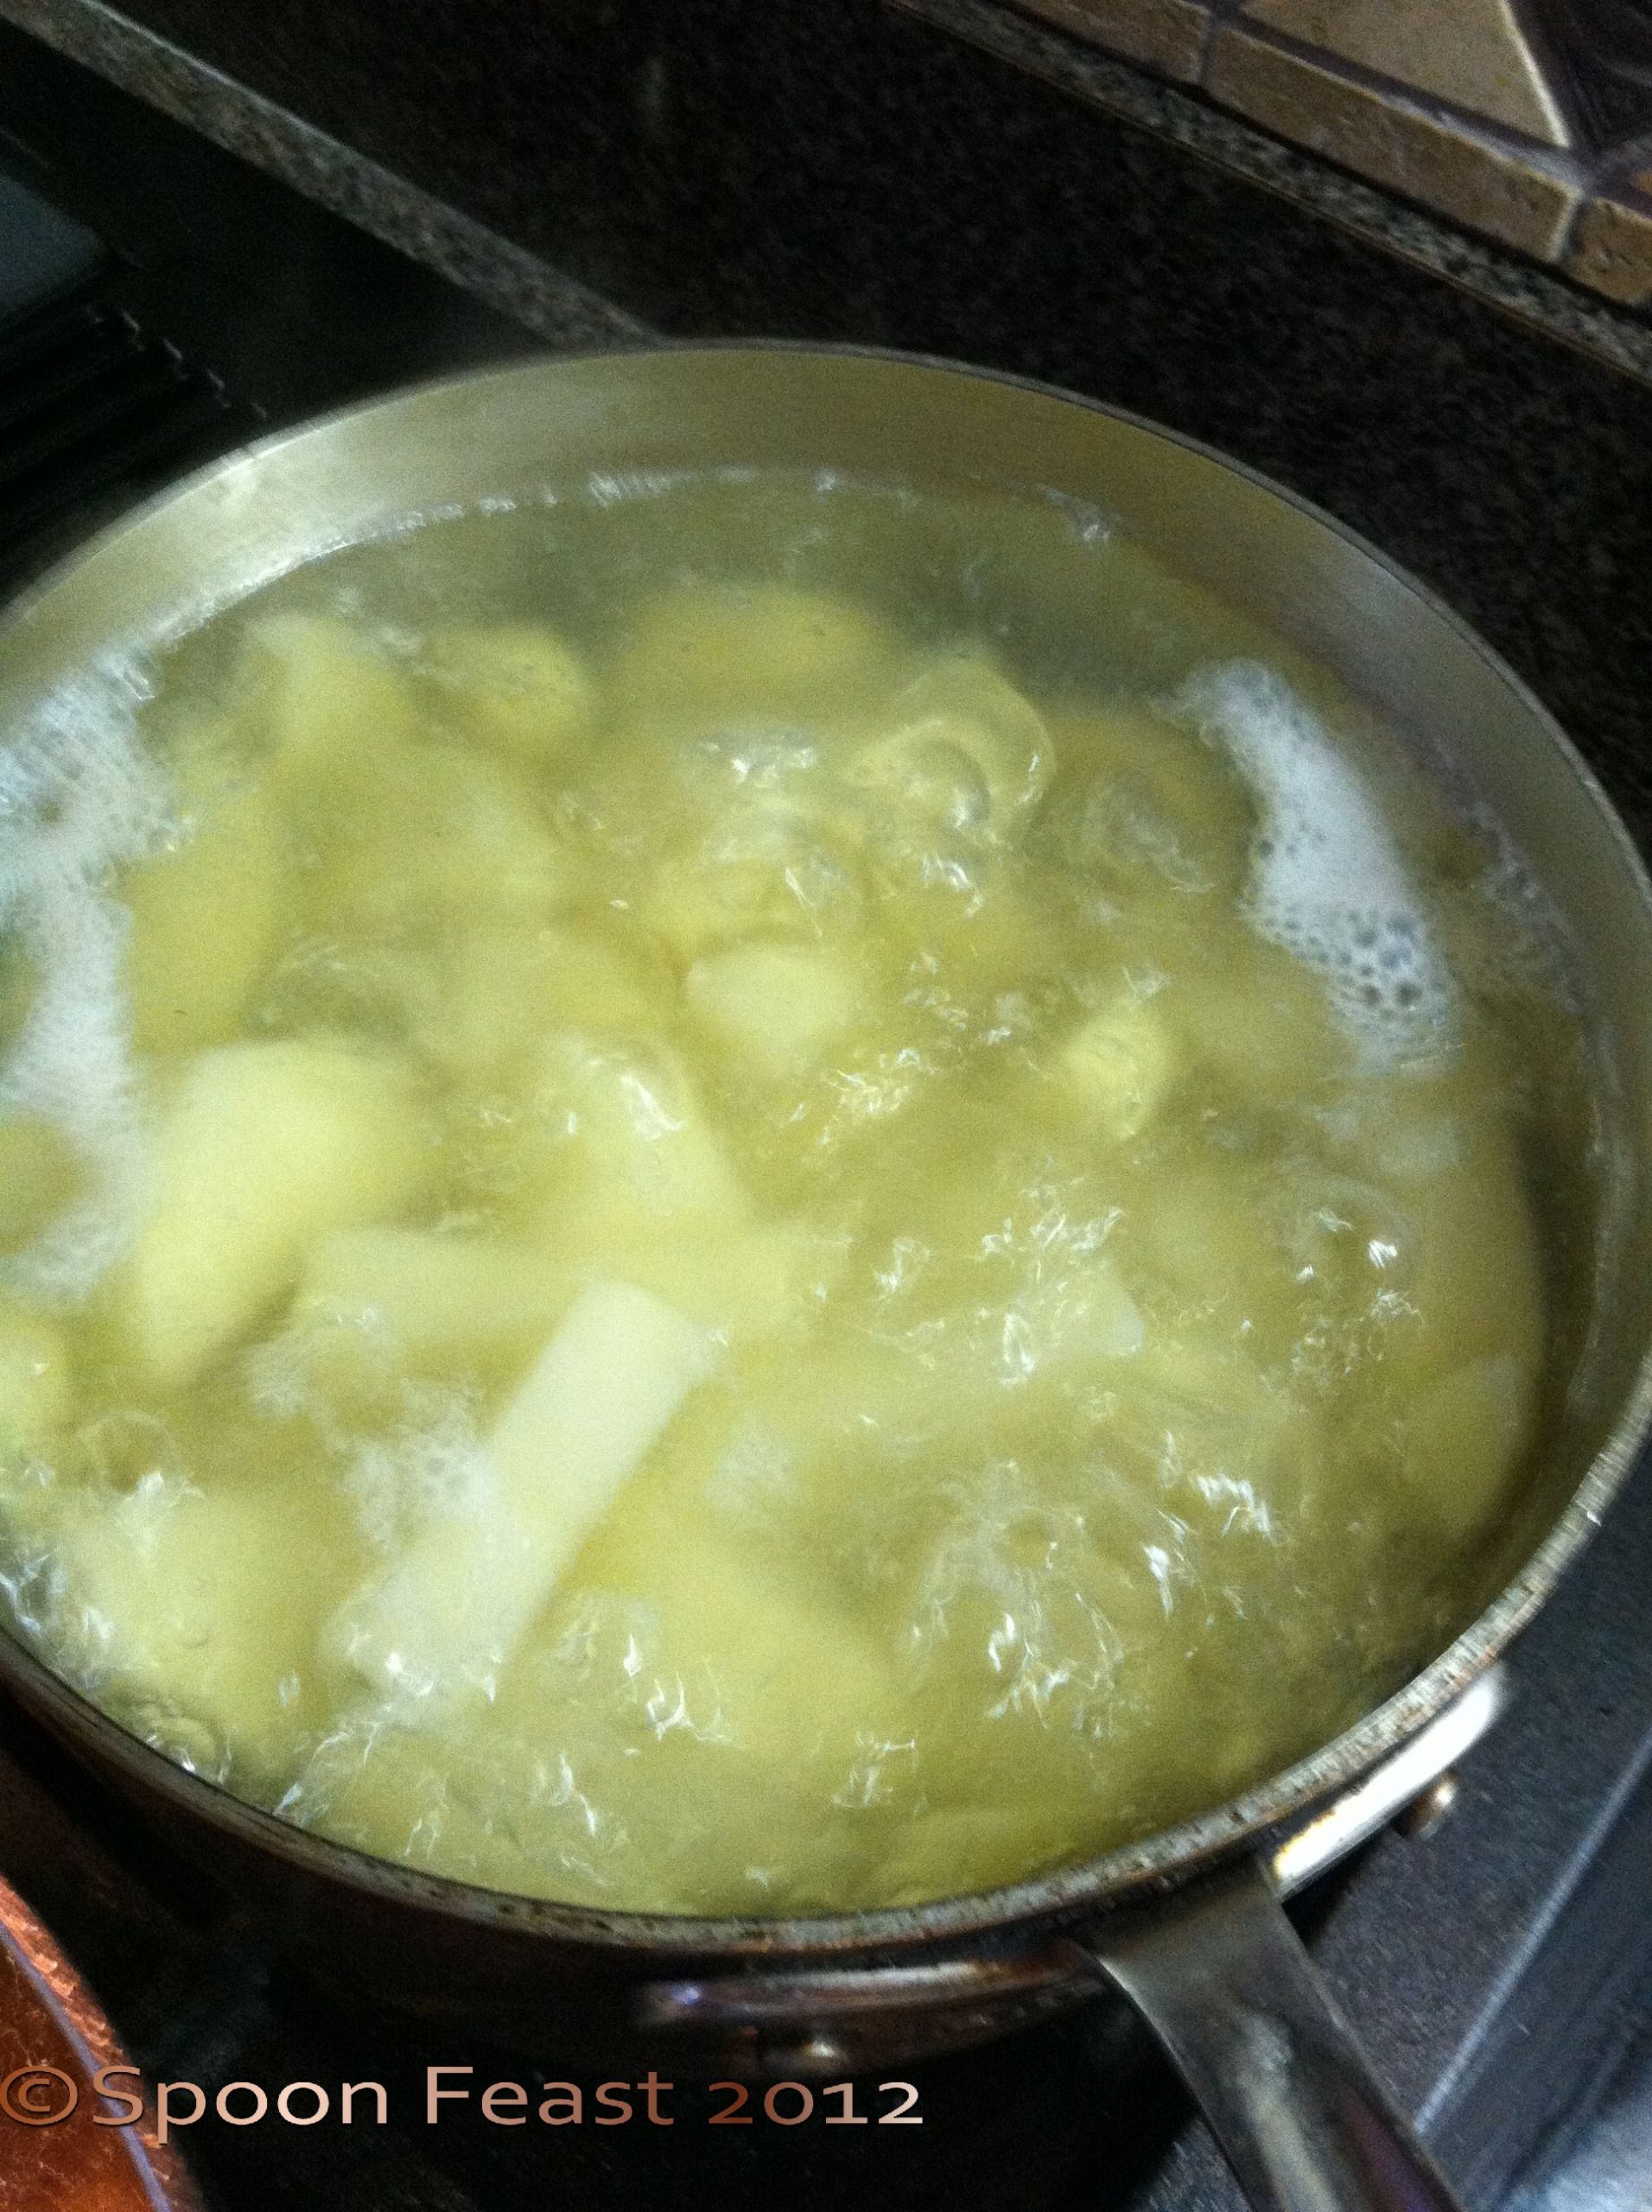 Boiling Potatoes For Mashed Potatoes
 How to Boil Potatoes for Making Mashed Potatoes